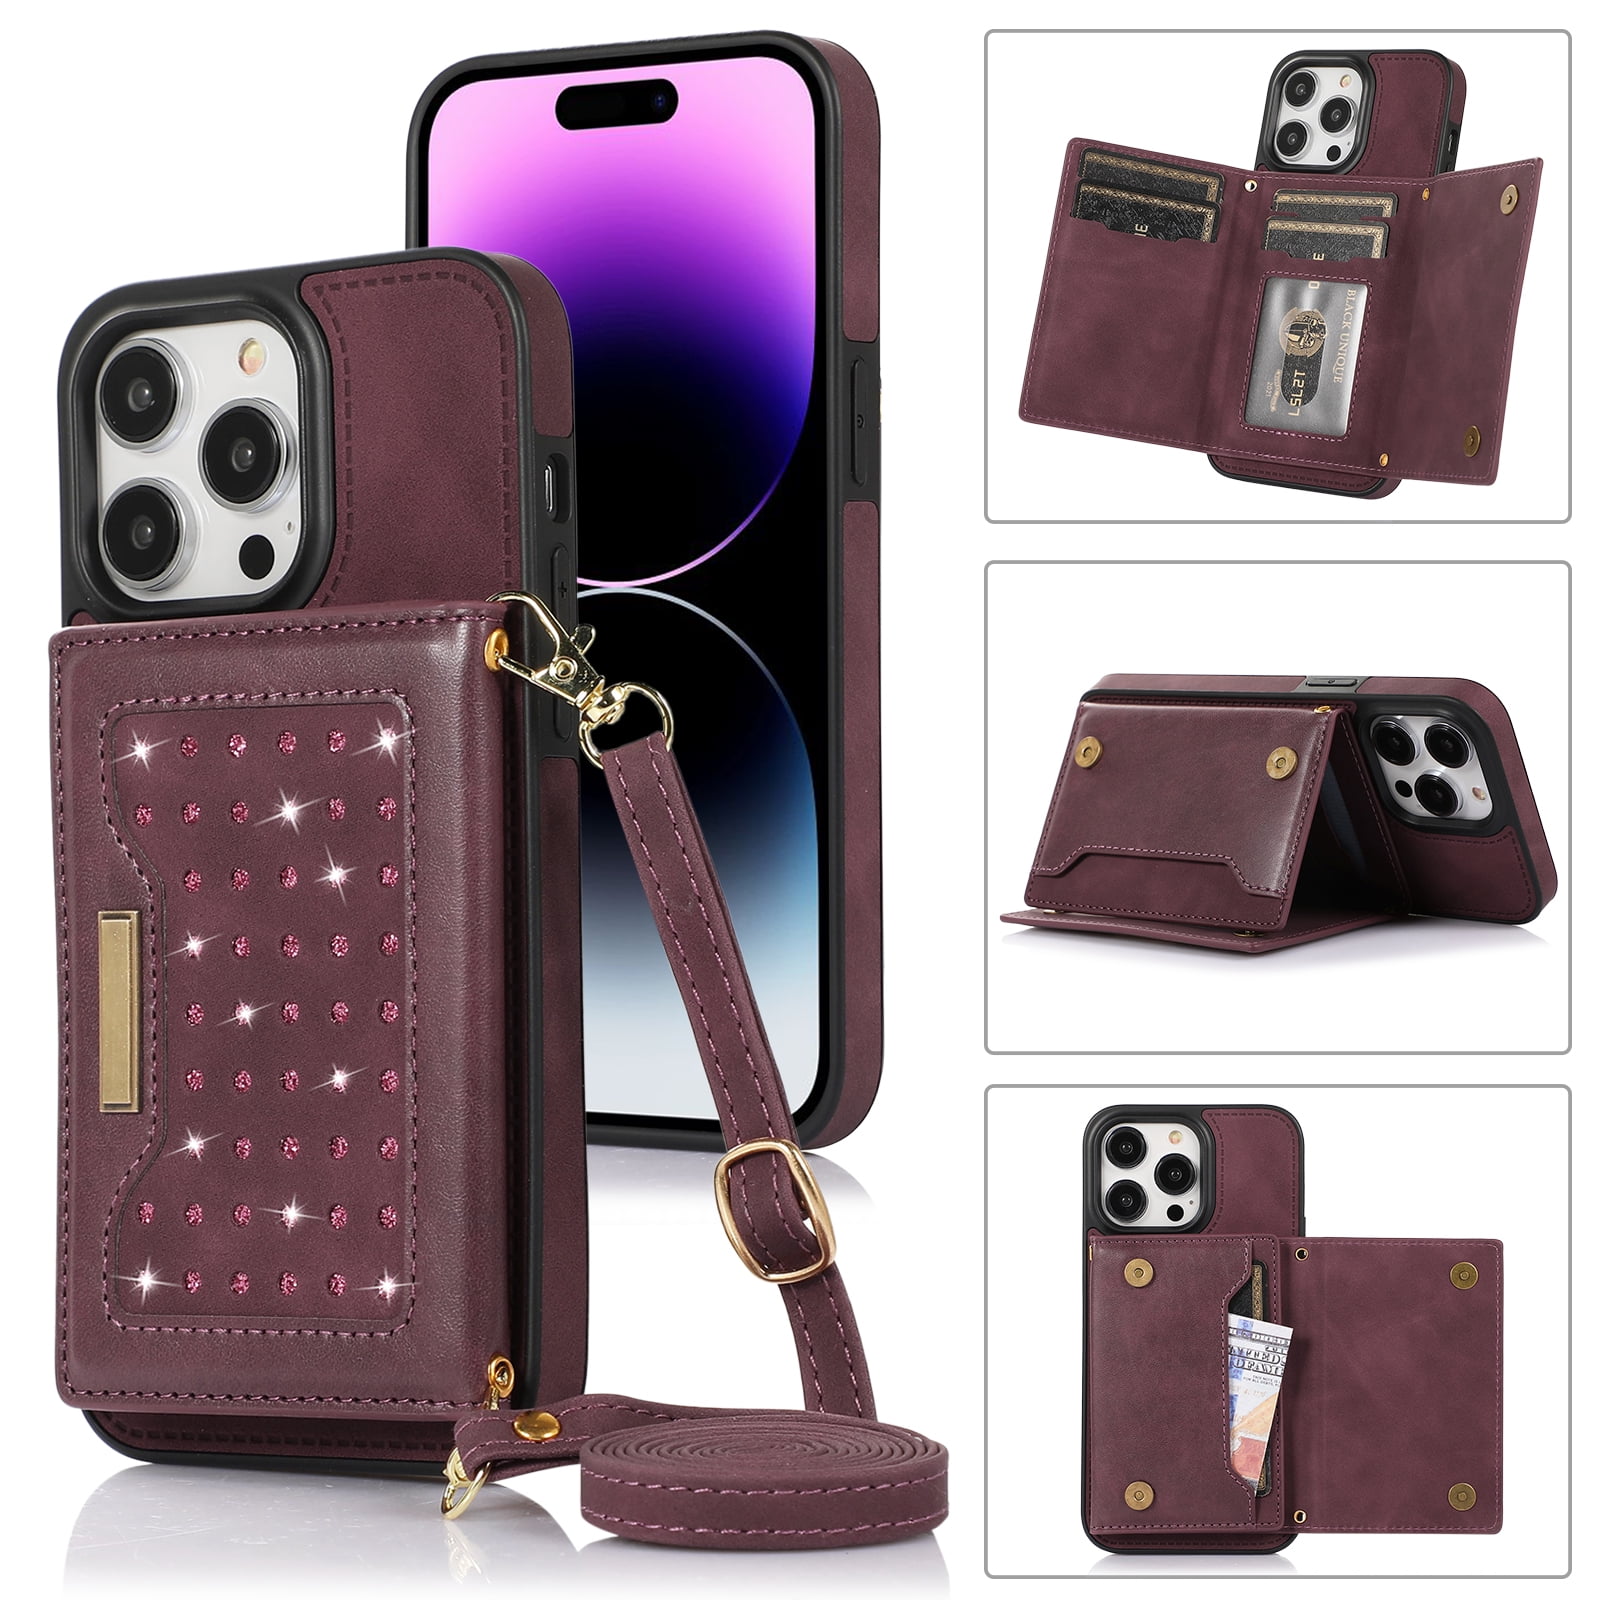 Case for iPhone 12 Pro Max,Crossbody Strap Wallet Credit Card Holder  Premium PU Leather Bling for Women,Magnetic Diamond Back Flip Cover with  Lanyard For iPhone 12 Pro Max, Wine Red 